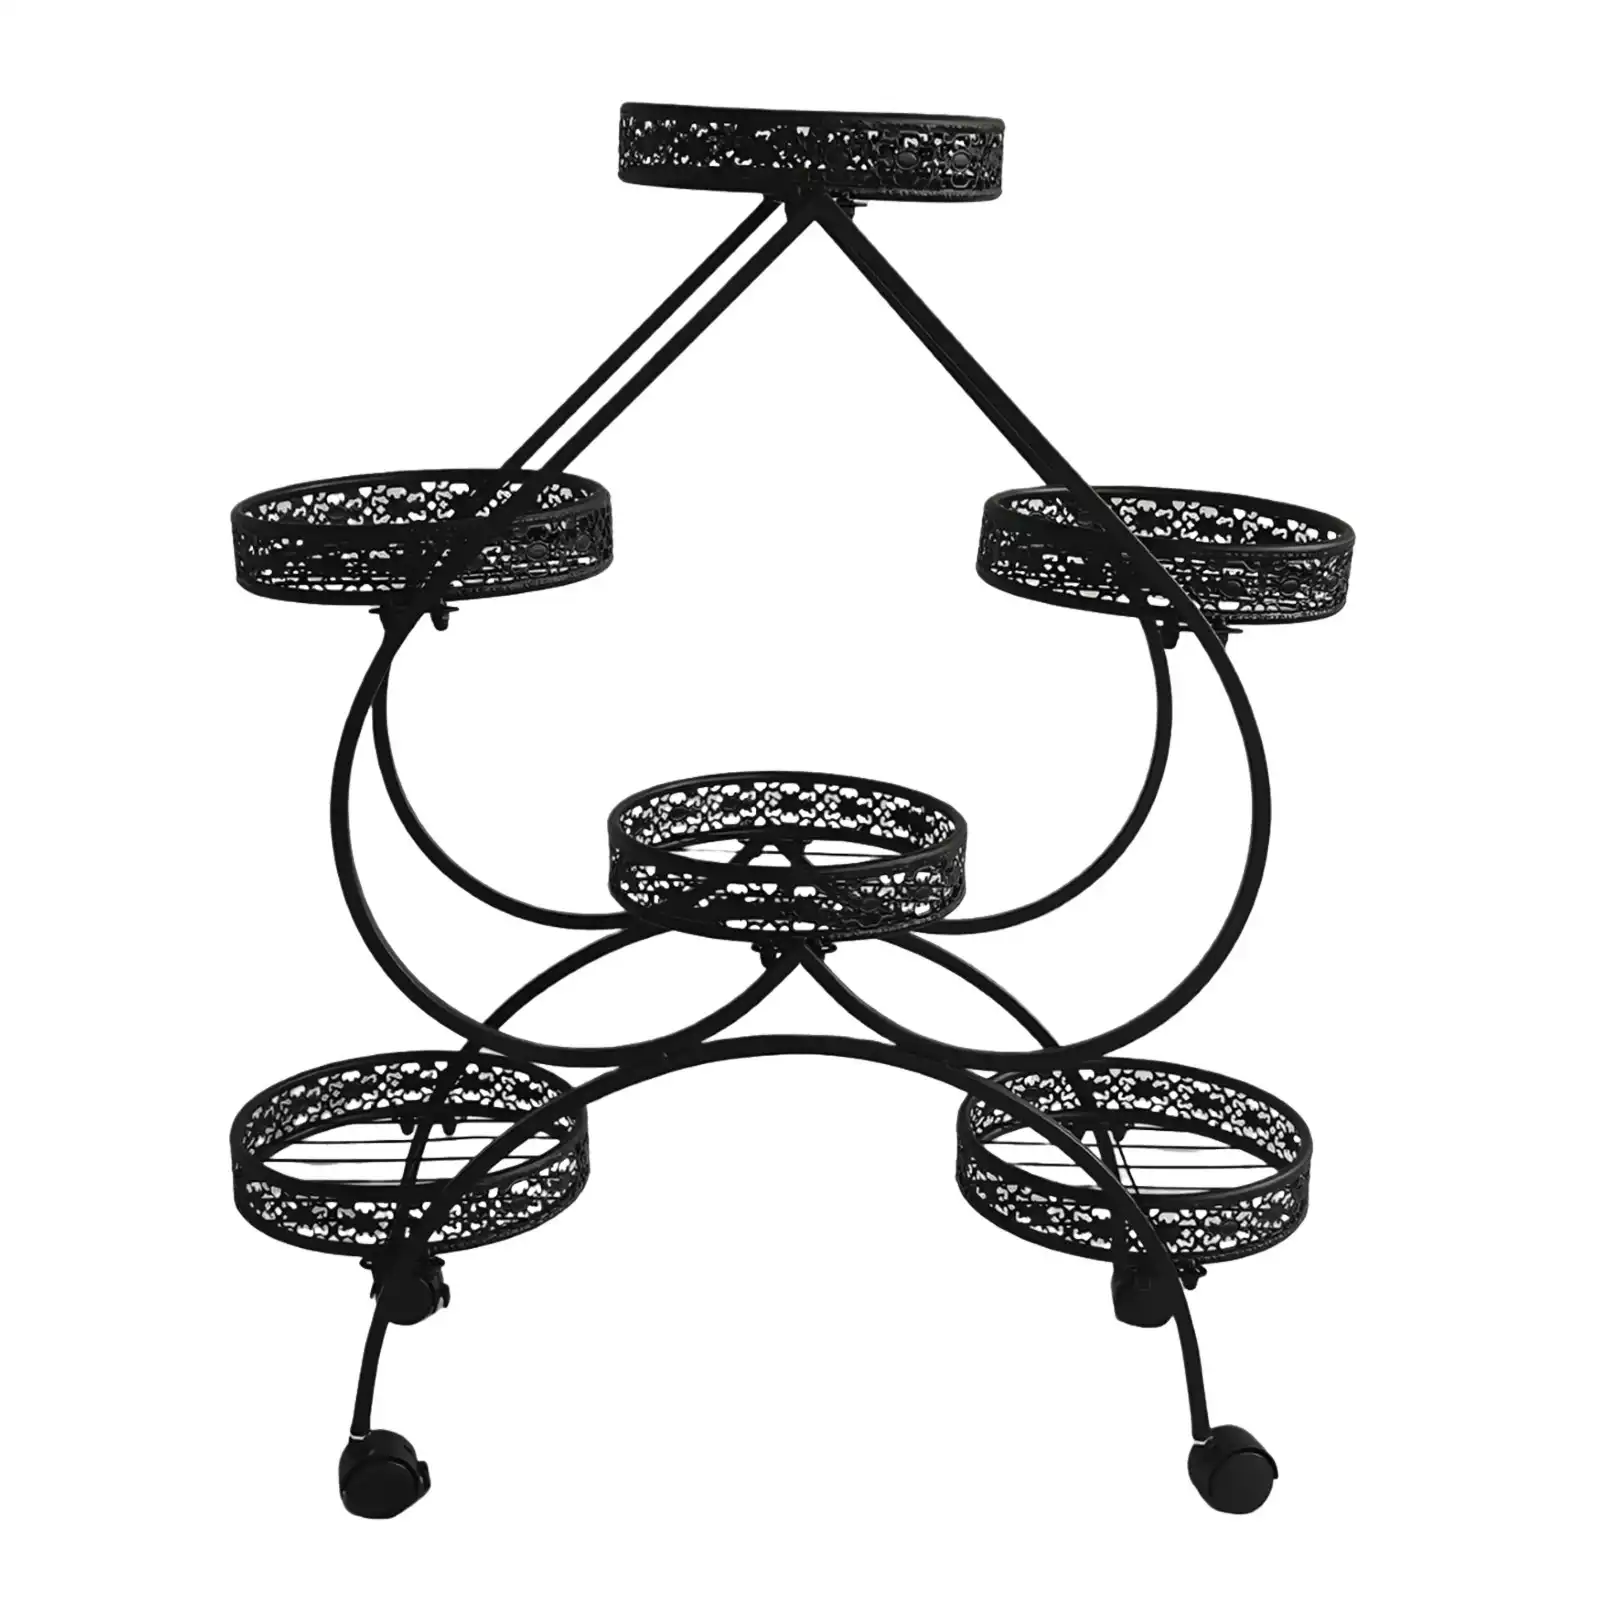 Viviendo 4 Tiers 6 Flower Potted Holders Indoor Metal Plant Stand with Wheels - Spades Black